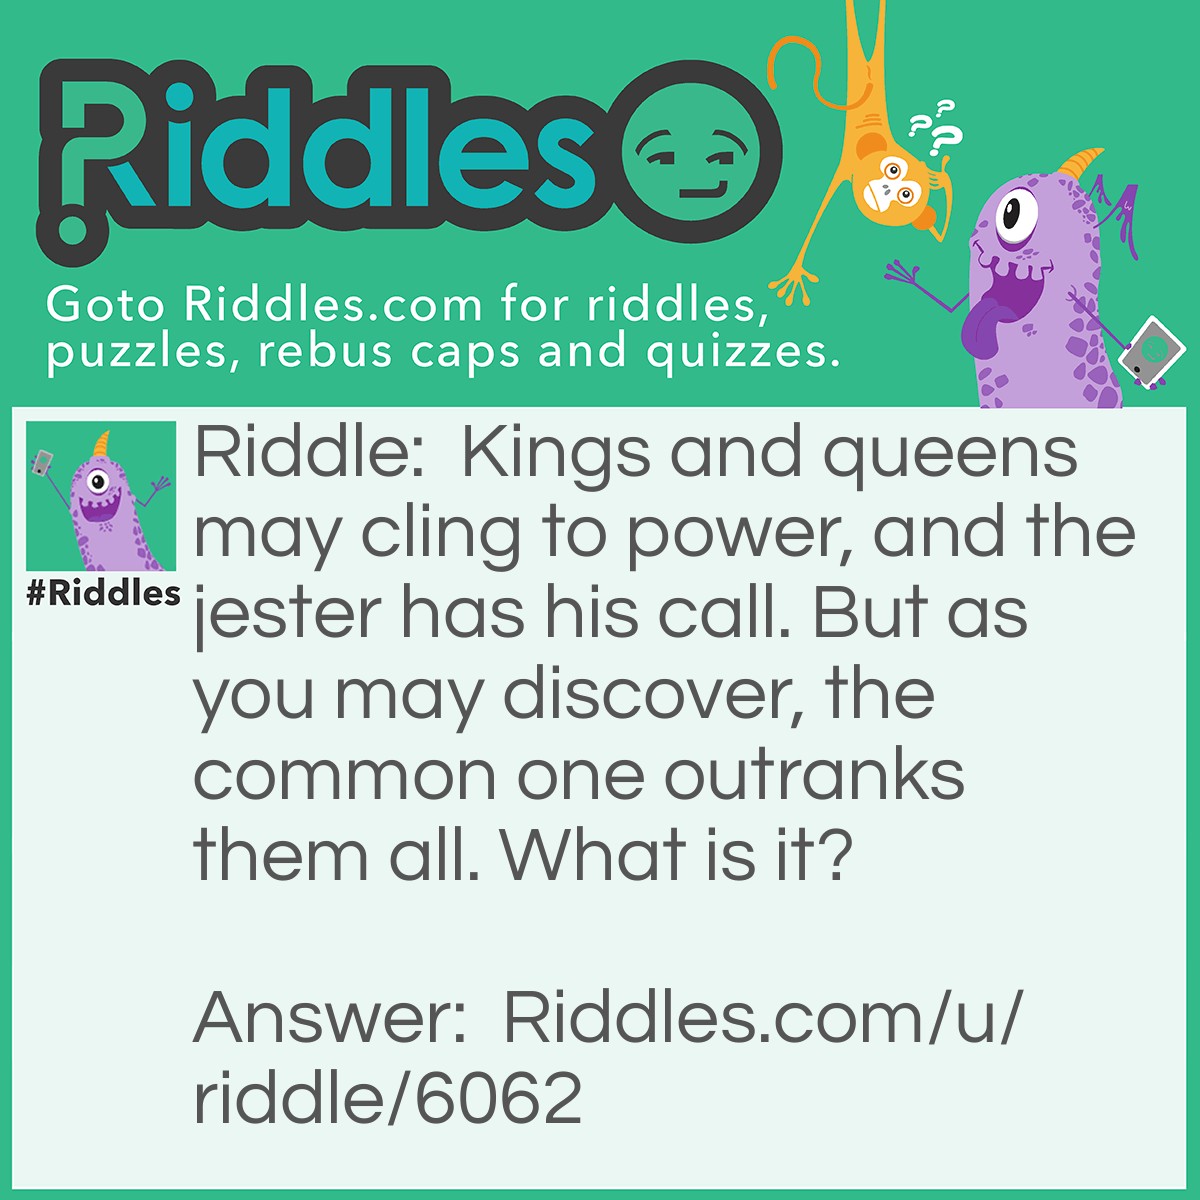 Riddle: Kings and queens may cling to power, and the jester has his call. But as you may discover, the common one outranks them all. What is it? Answer: An ace (card)